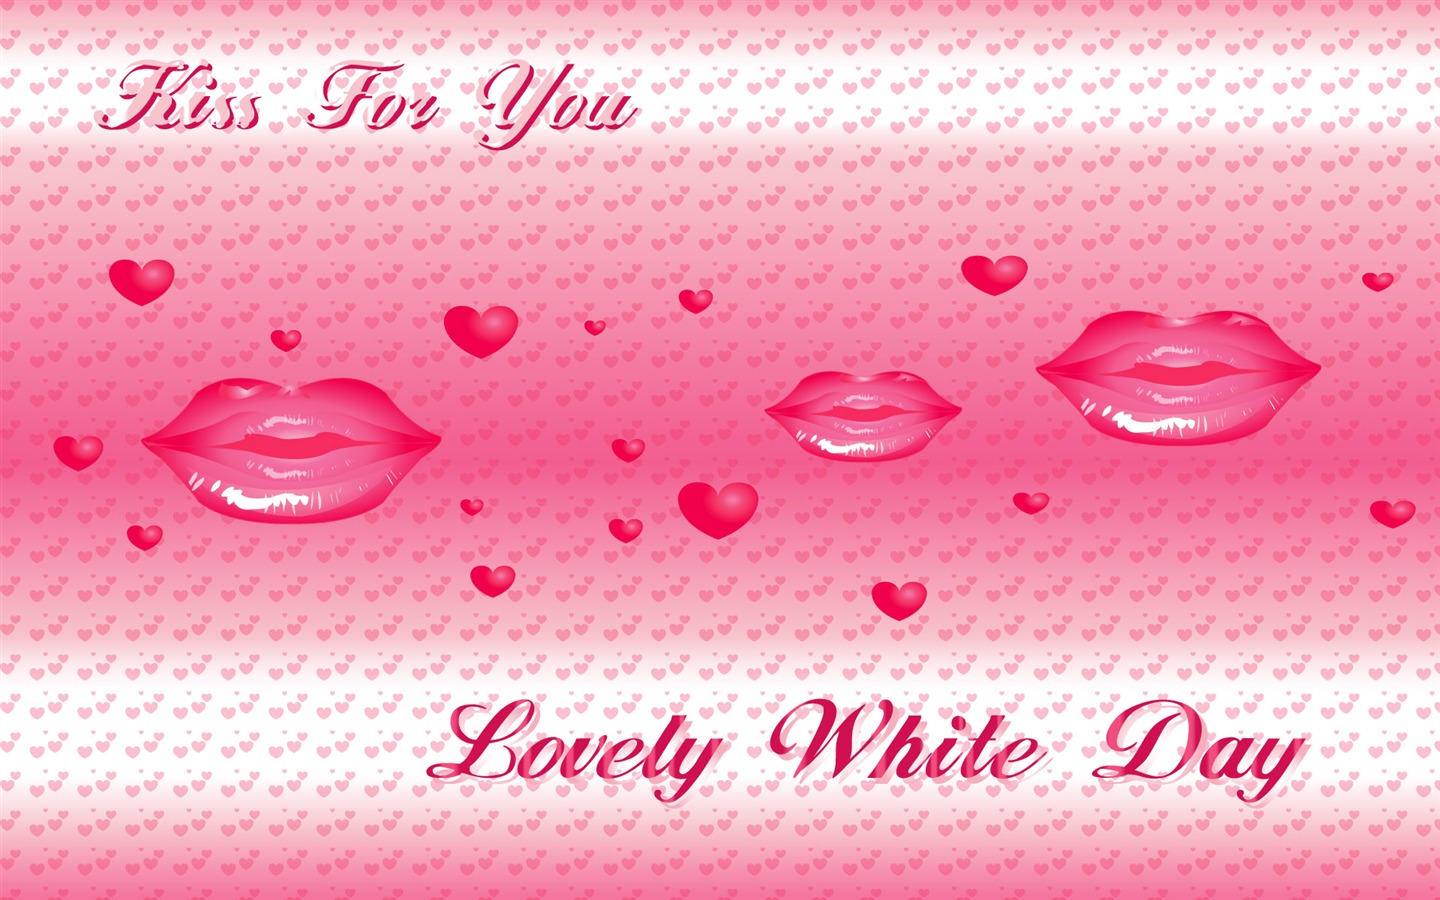 Valentine's Day Theme Wallpapers (1) #4 - 1440x900